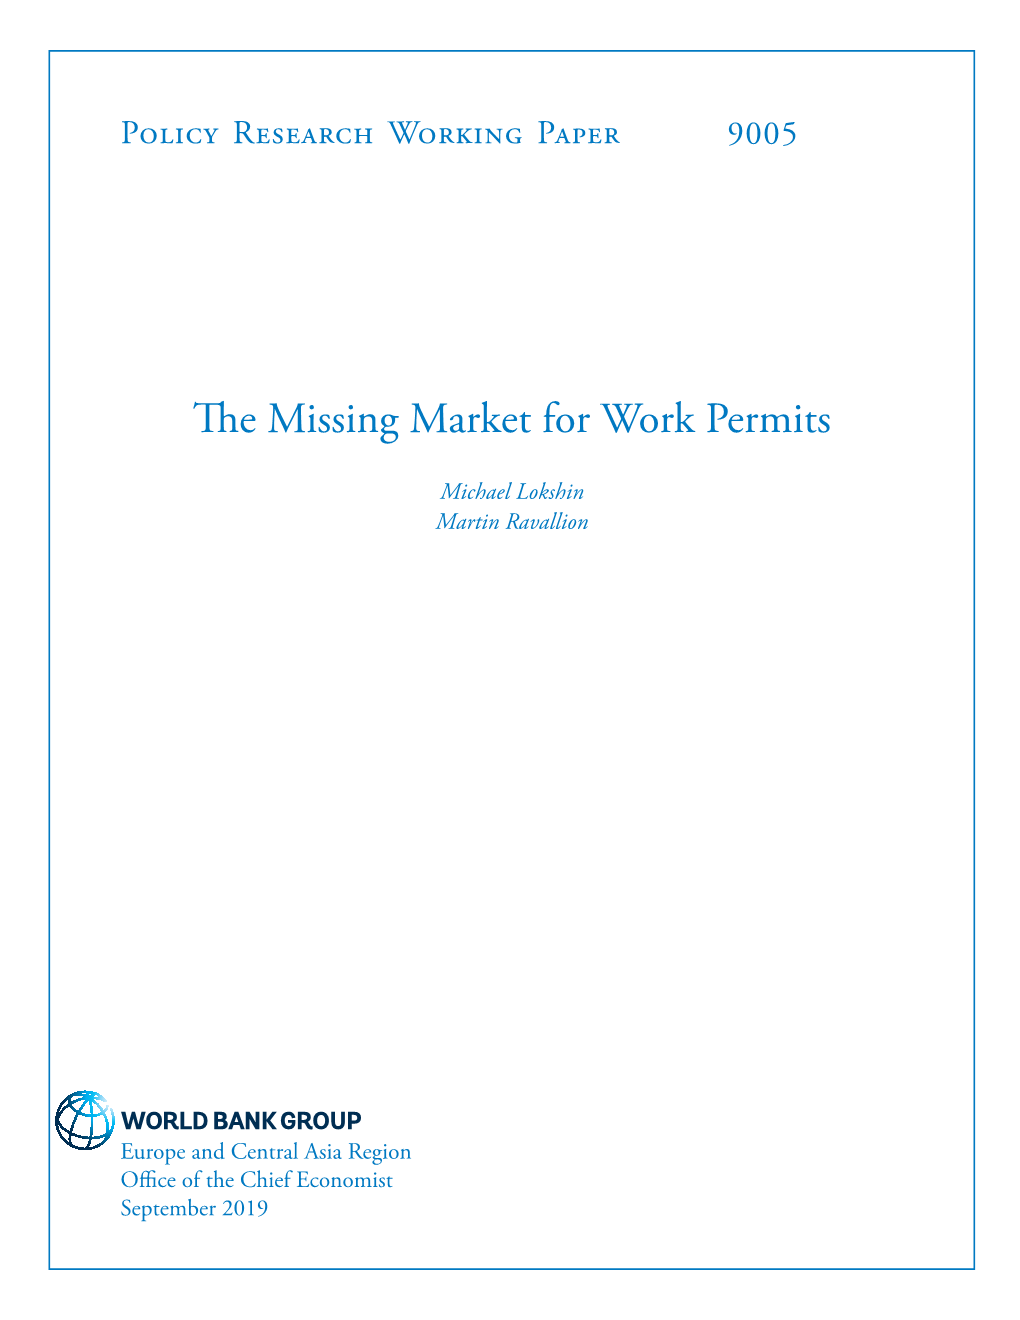 The Missing Market for Work Permits